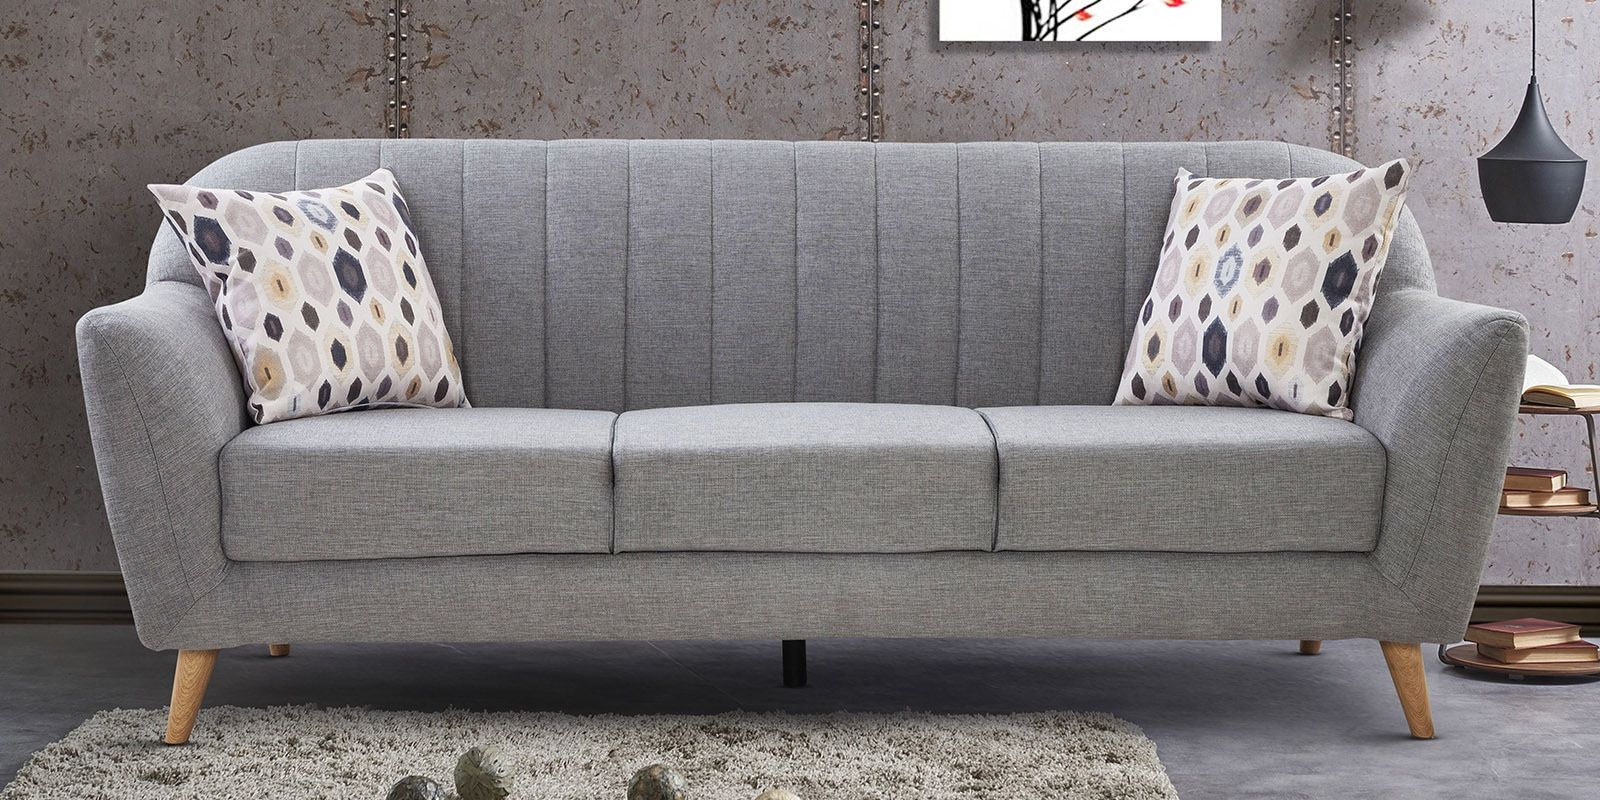 Ludovic Contemporary Sofas Light Gray Inside Favorite Buy Antalya 3 Seater Sofa In Grey Coloururban Living (View 7 of 20)